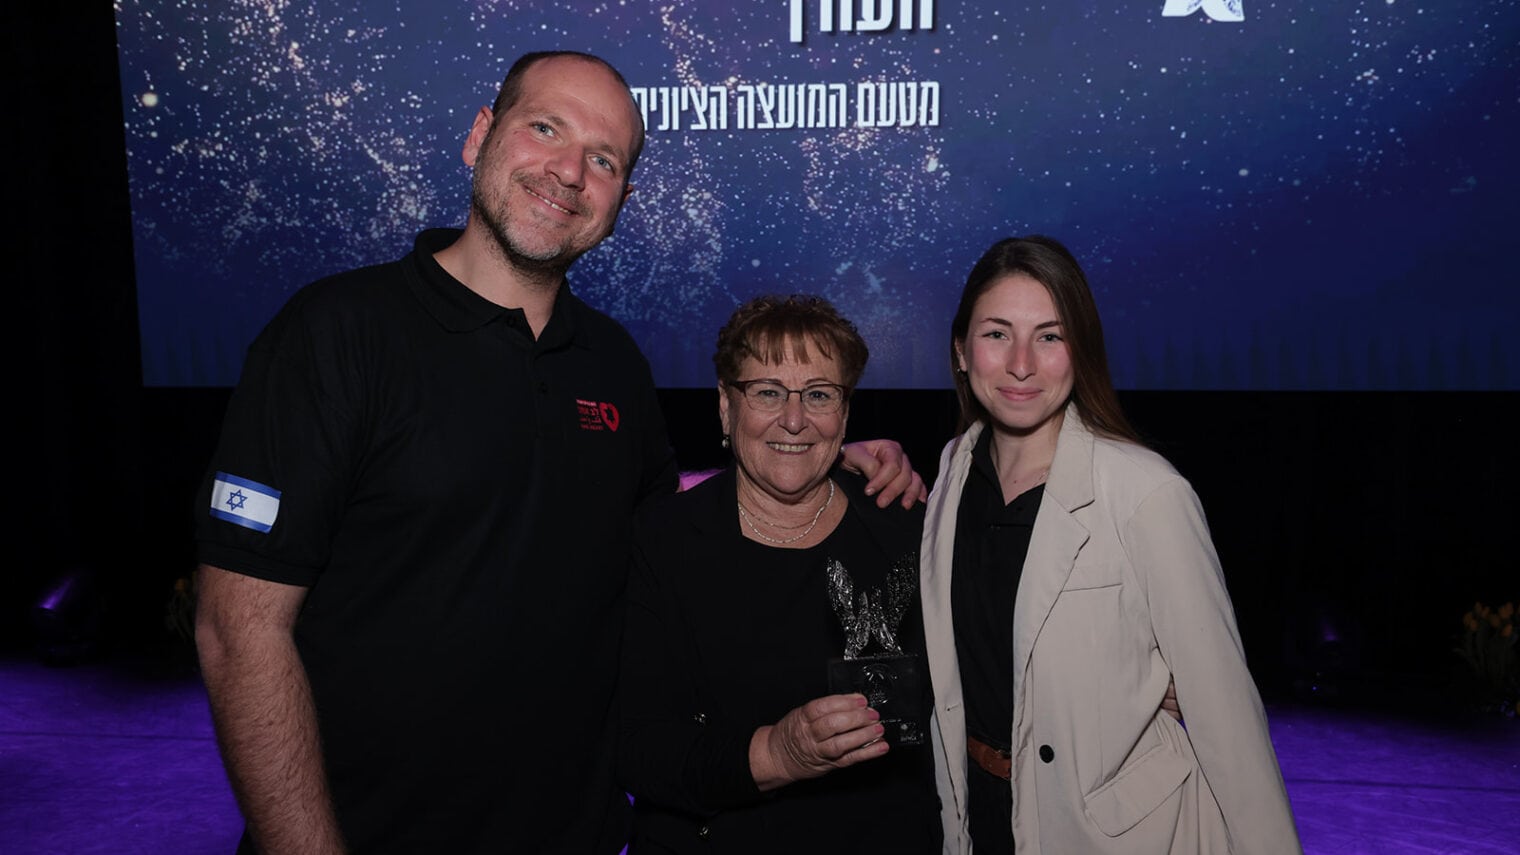 One Heart CEO Tomer Dror, left, with Miriam Peretz and One Heart COO Shir Diner receiving awards for their efforts on behalf of Gaza border residents. Photo courtesy of Lev Echad